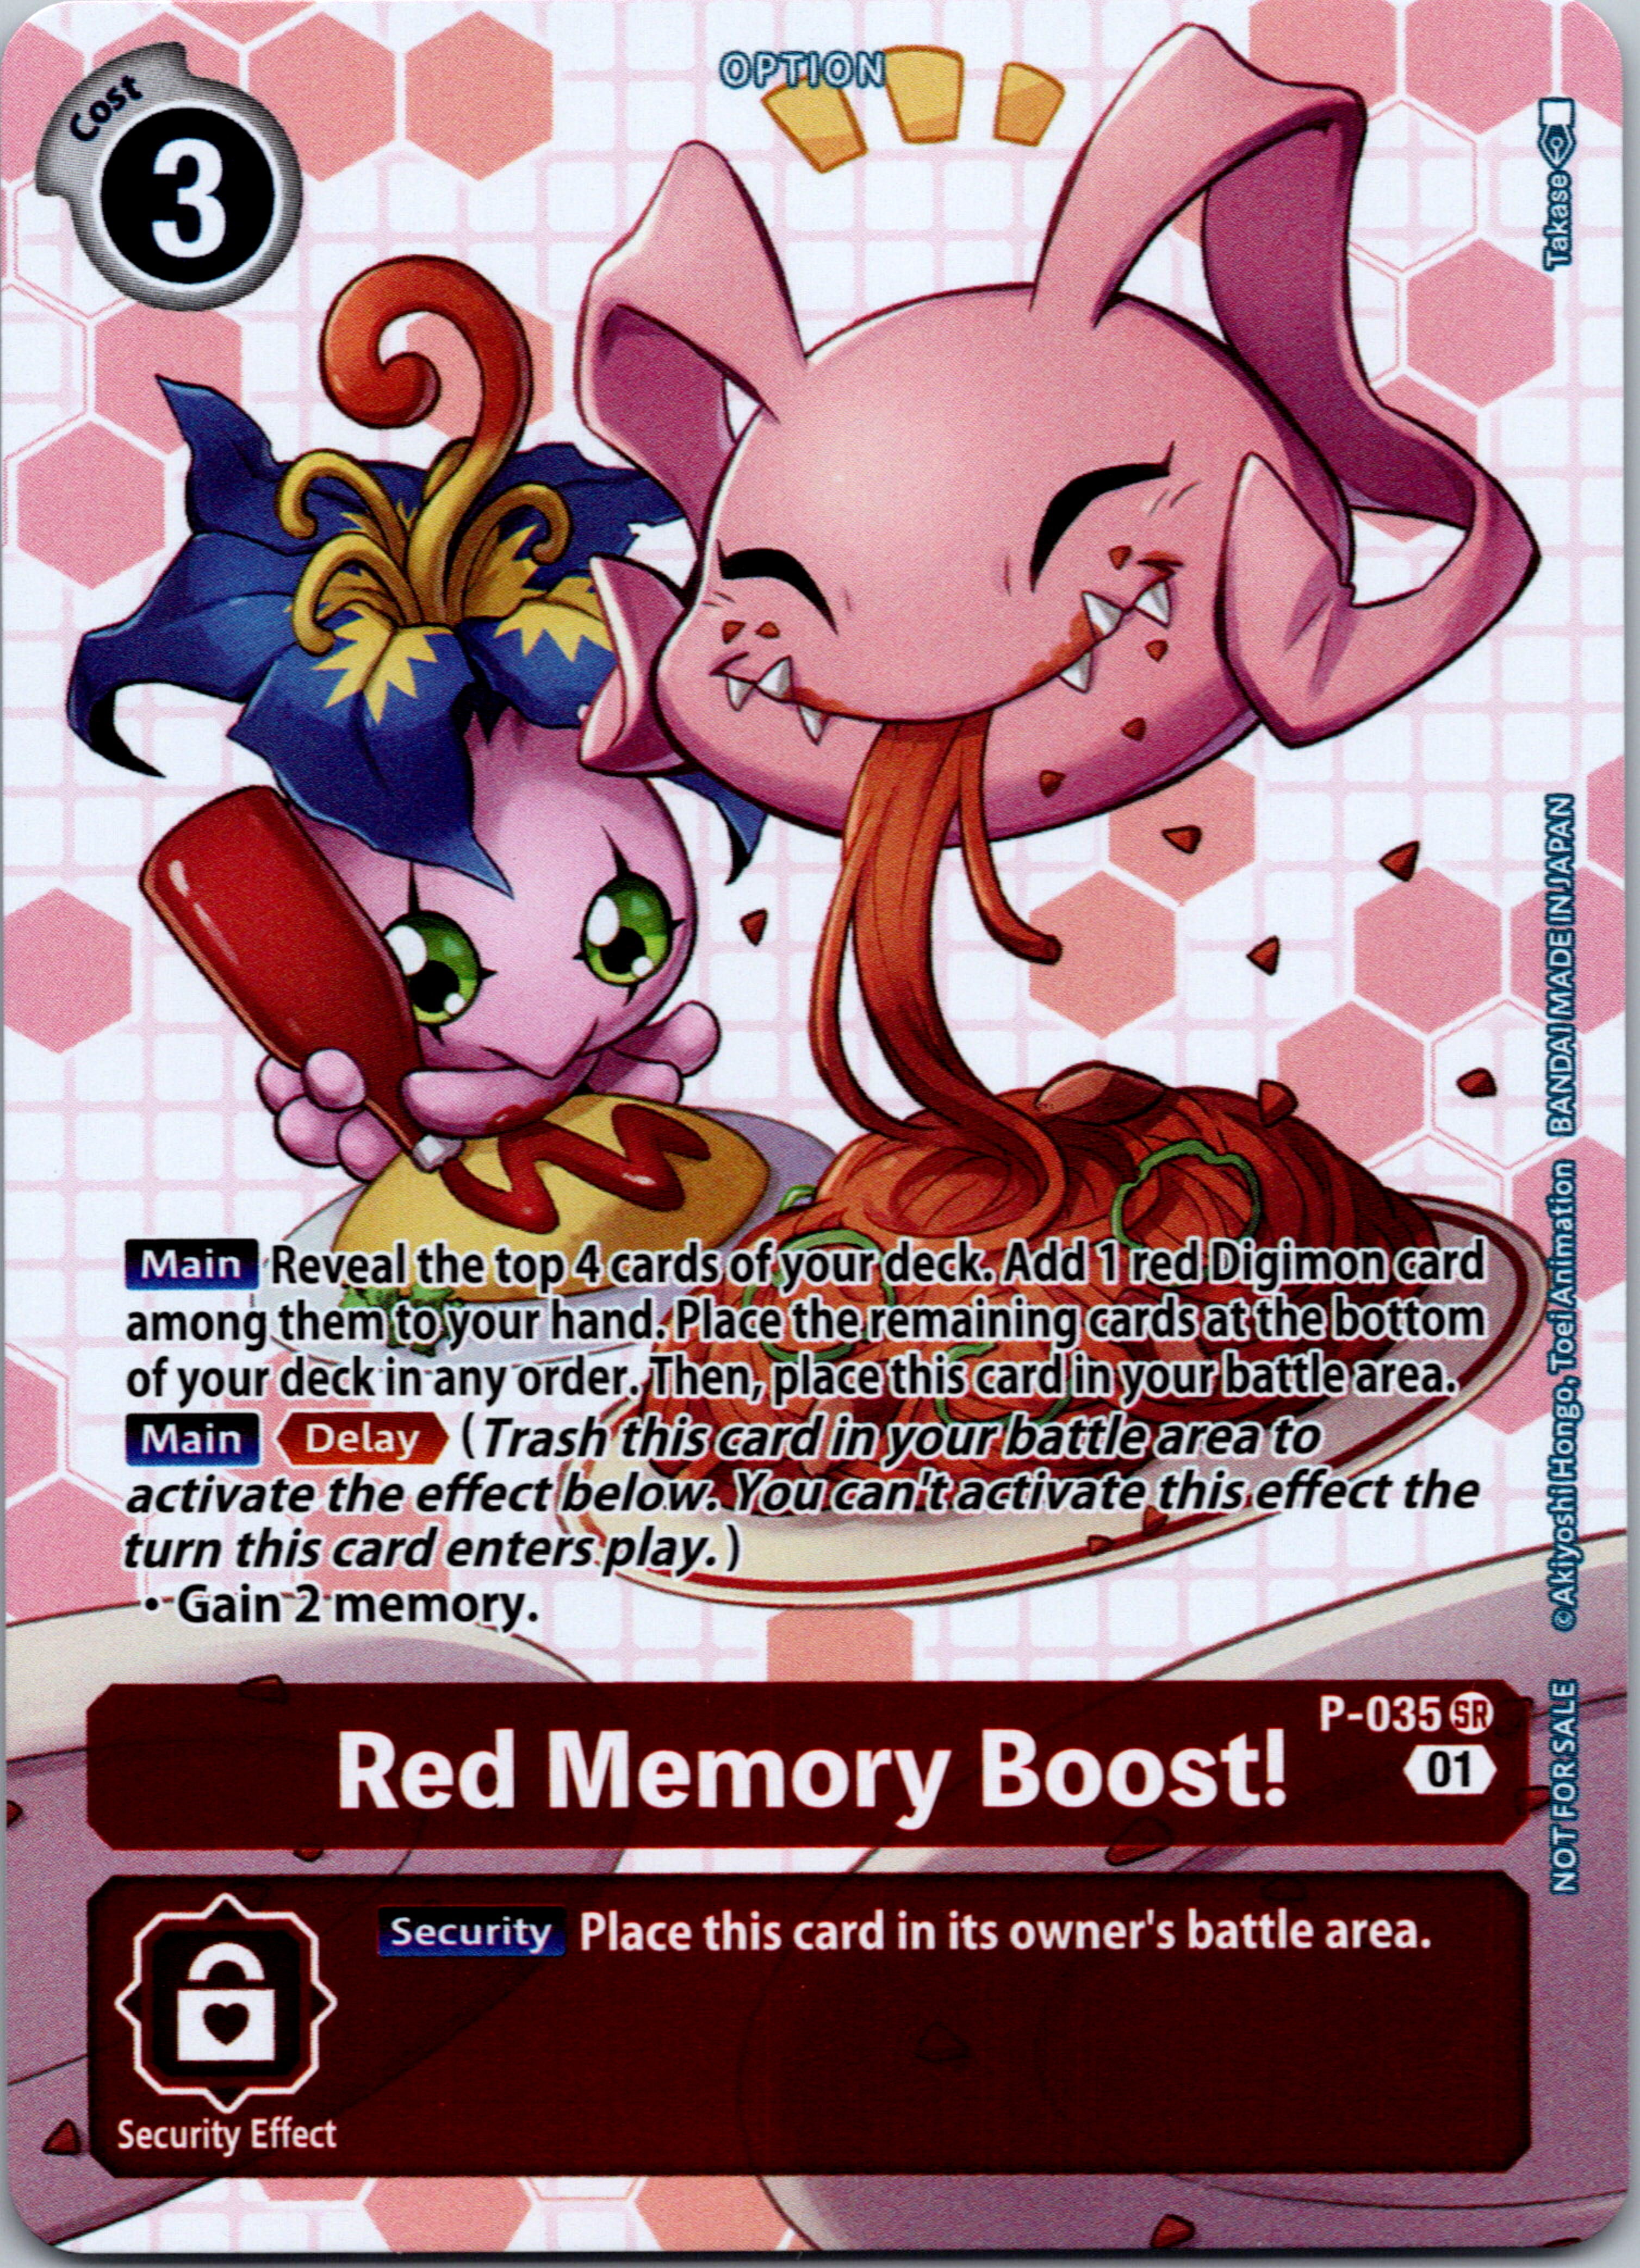 Red Memory Boost! - P-035 (Next Adventure Box Promotion Pack) [P-035] [Digimon Promotion Cards] Normal